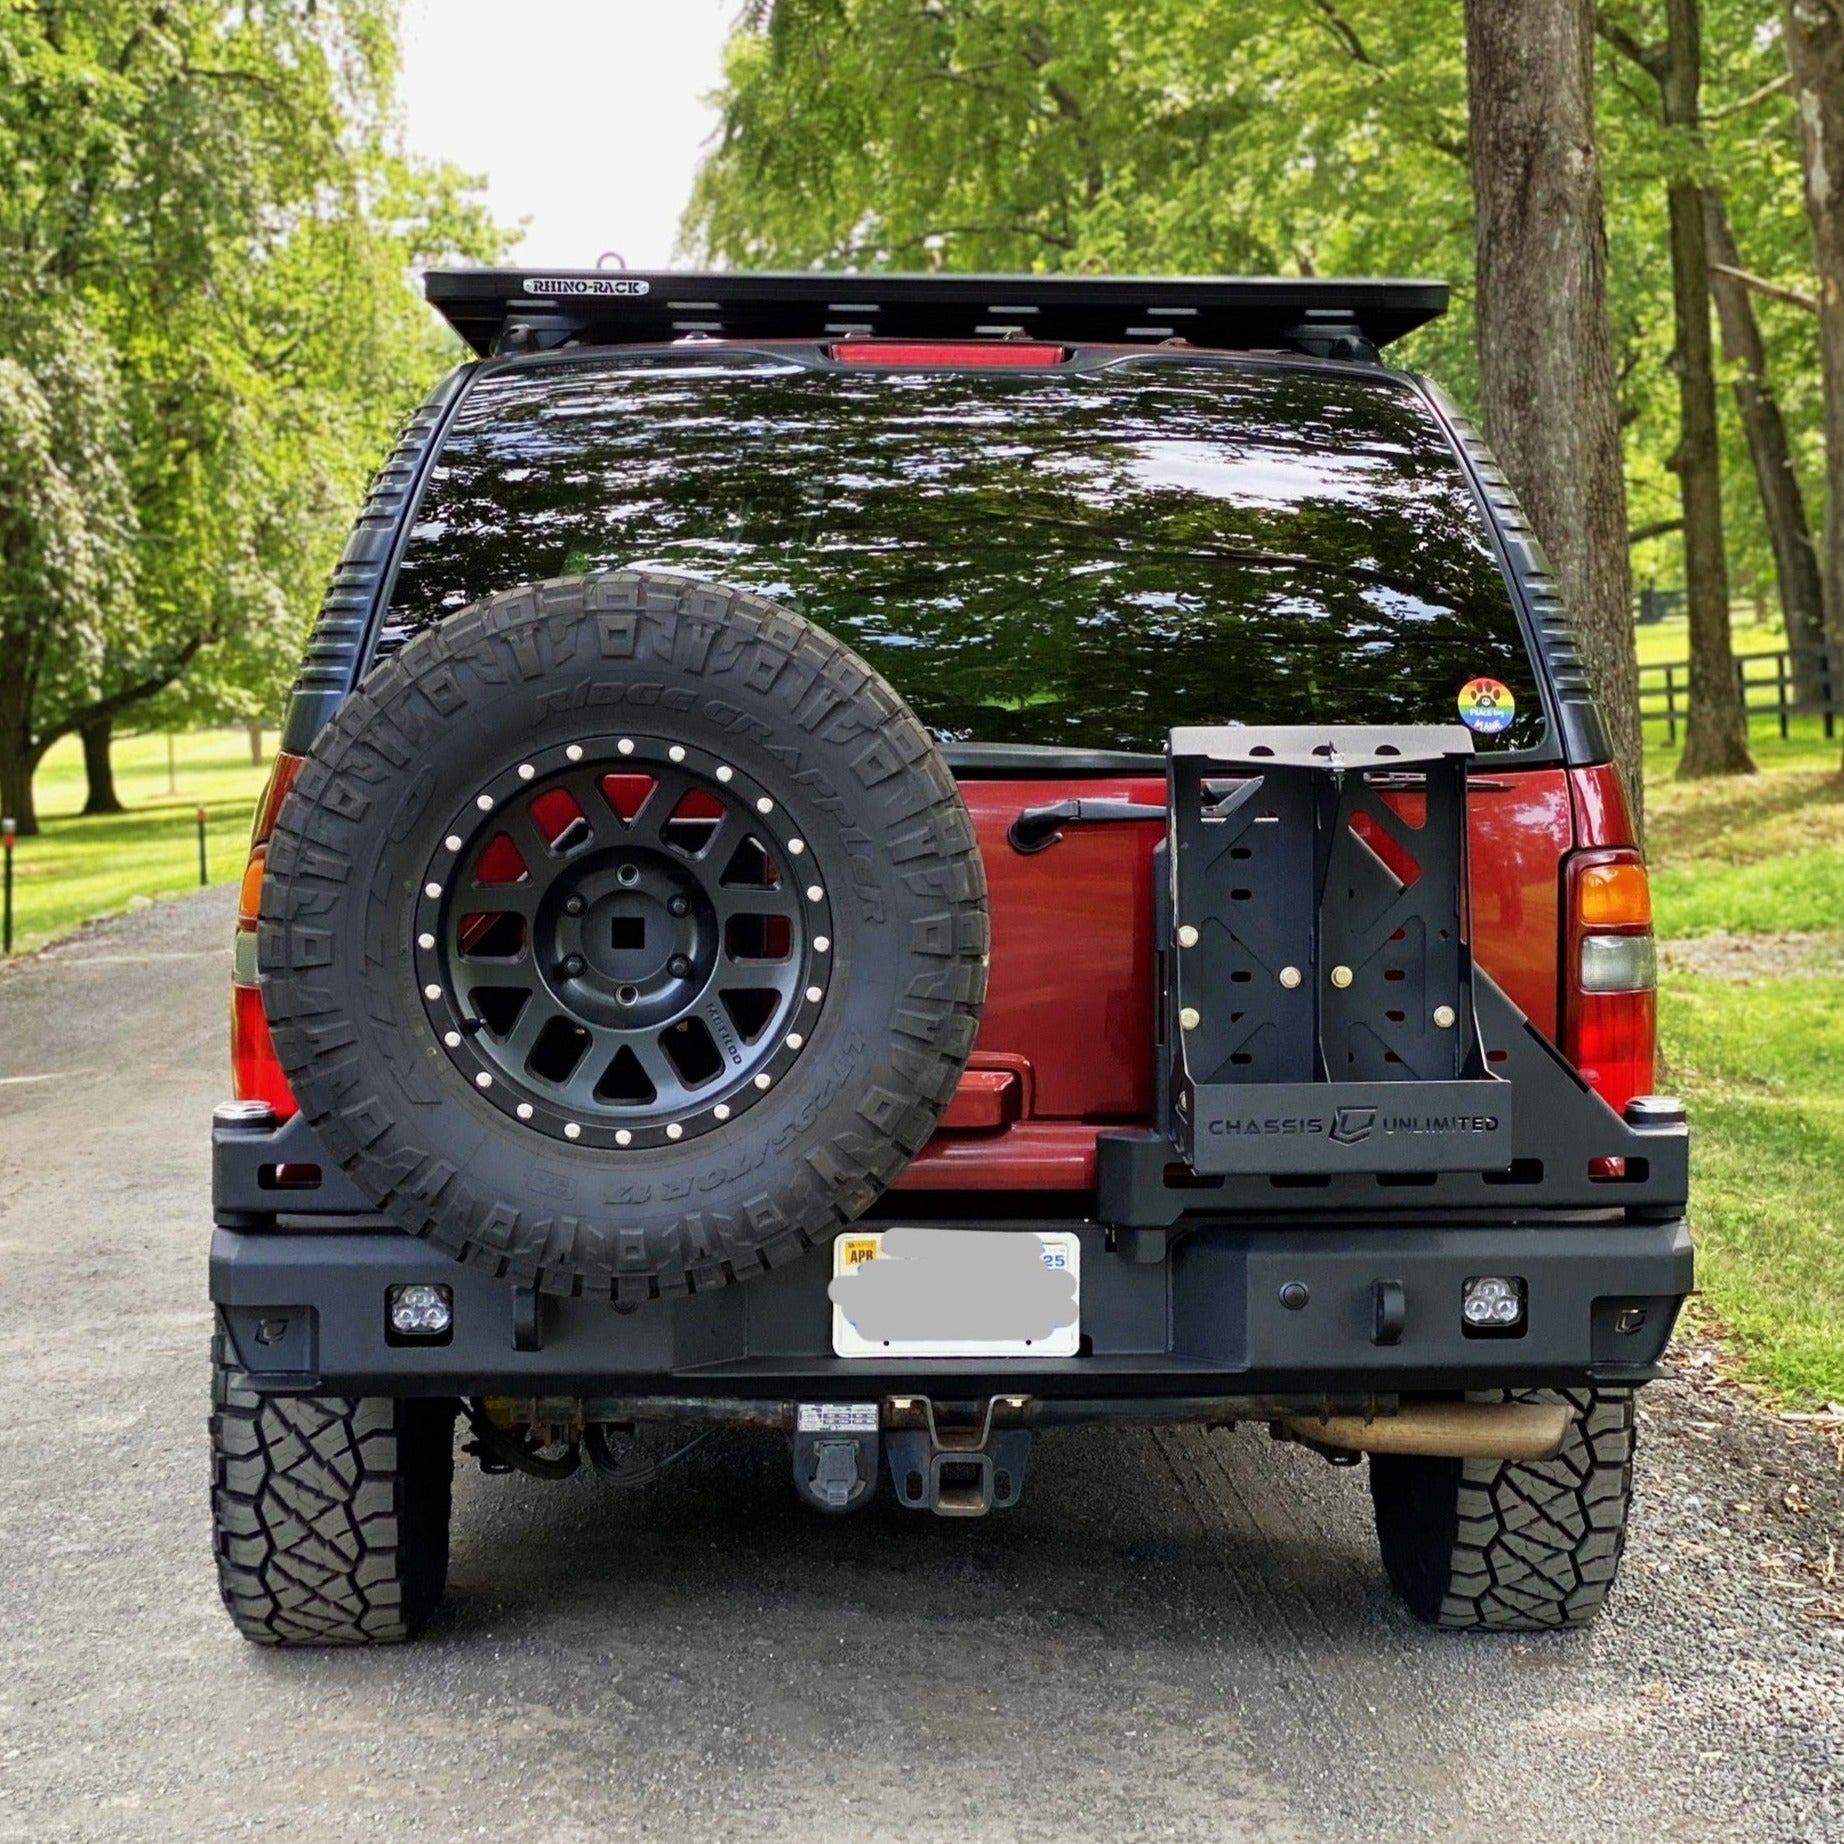 2000-2006 Chevy Surburban Dual Swing Out Rear Bumper by Chassis Unlimited Baseline Overland